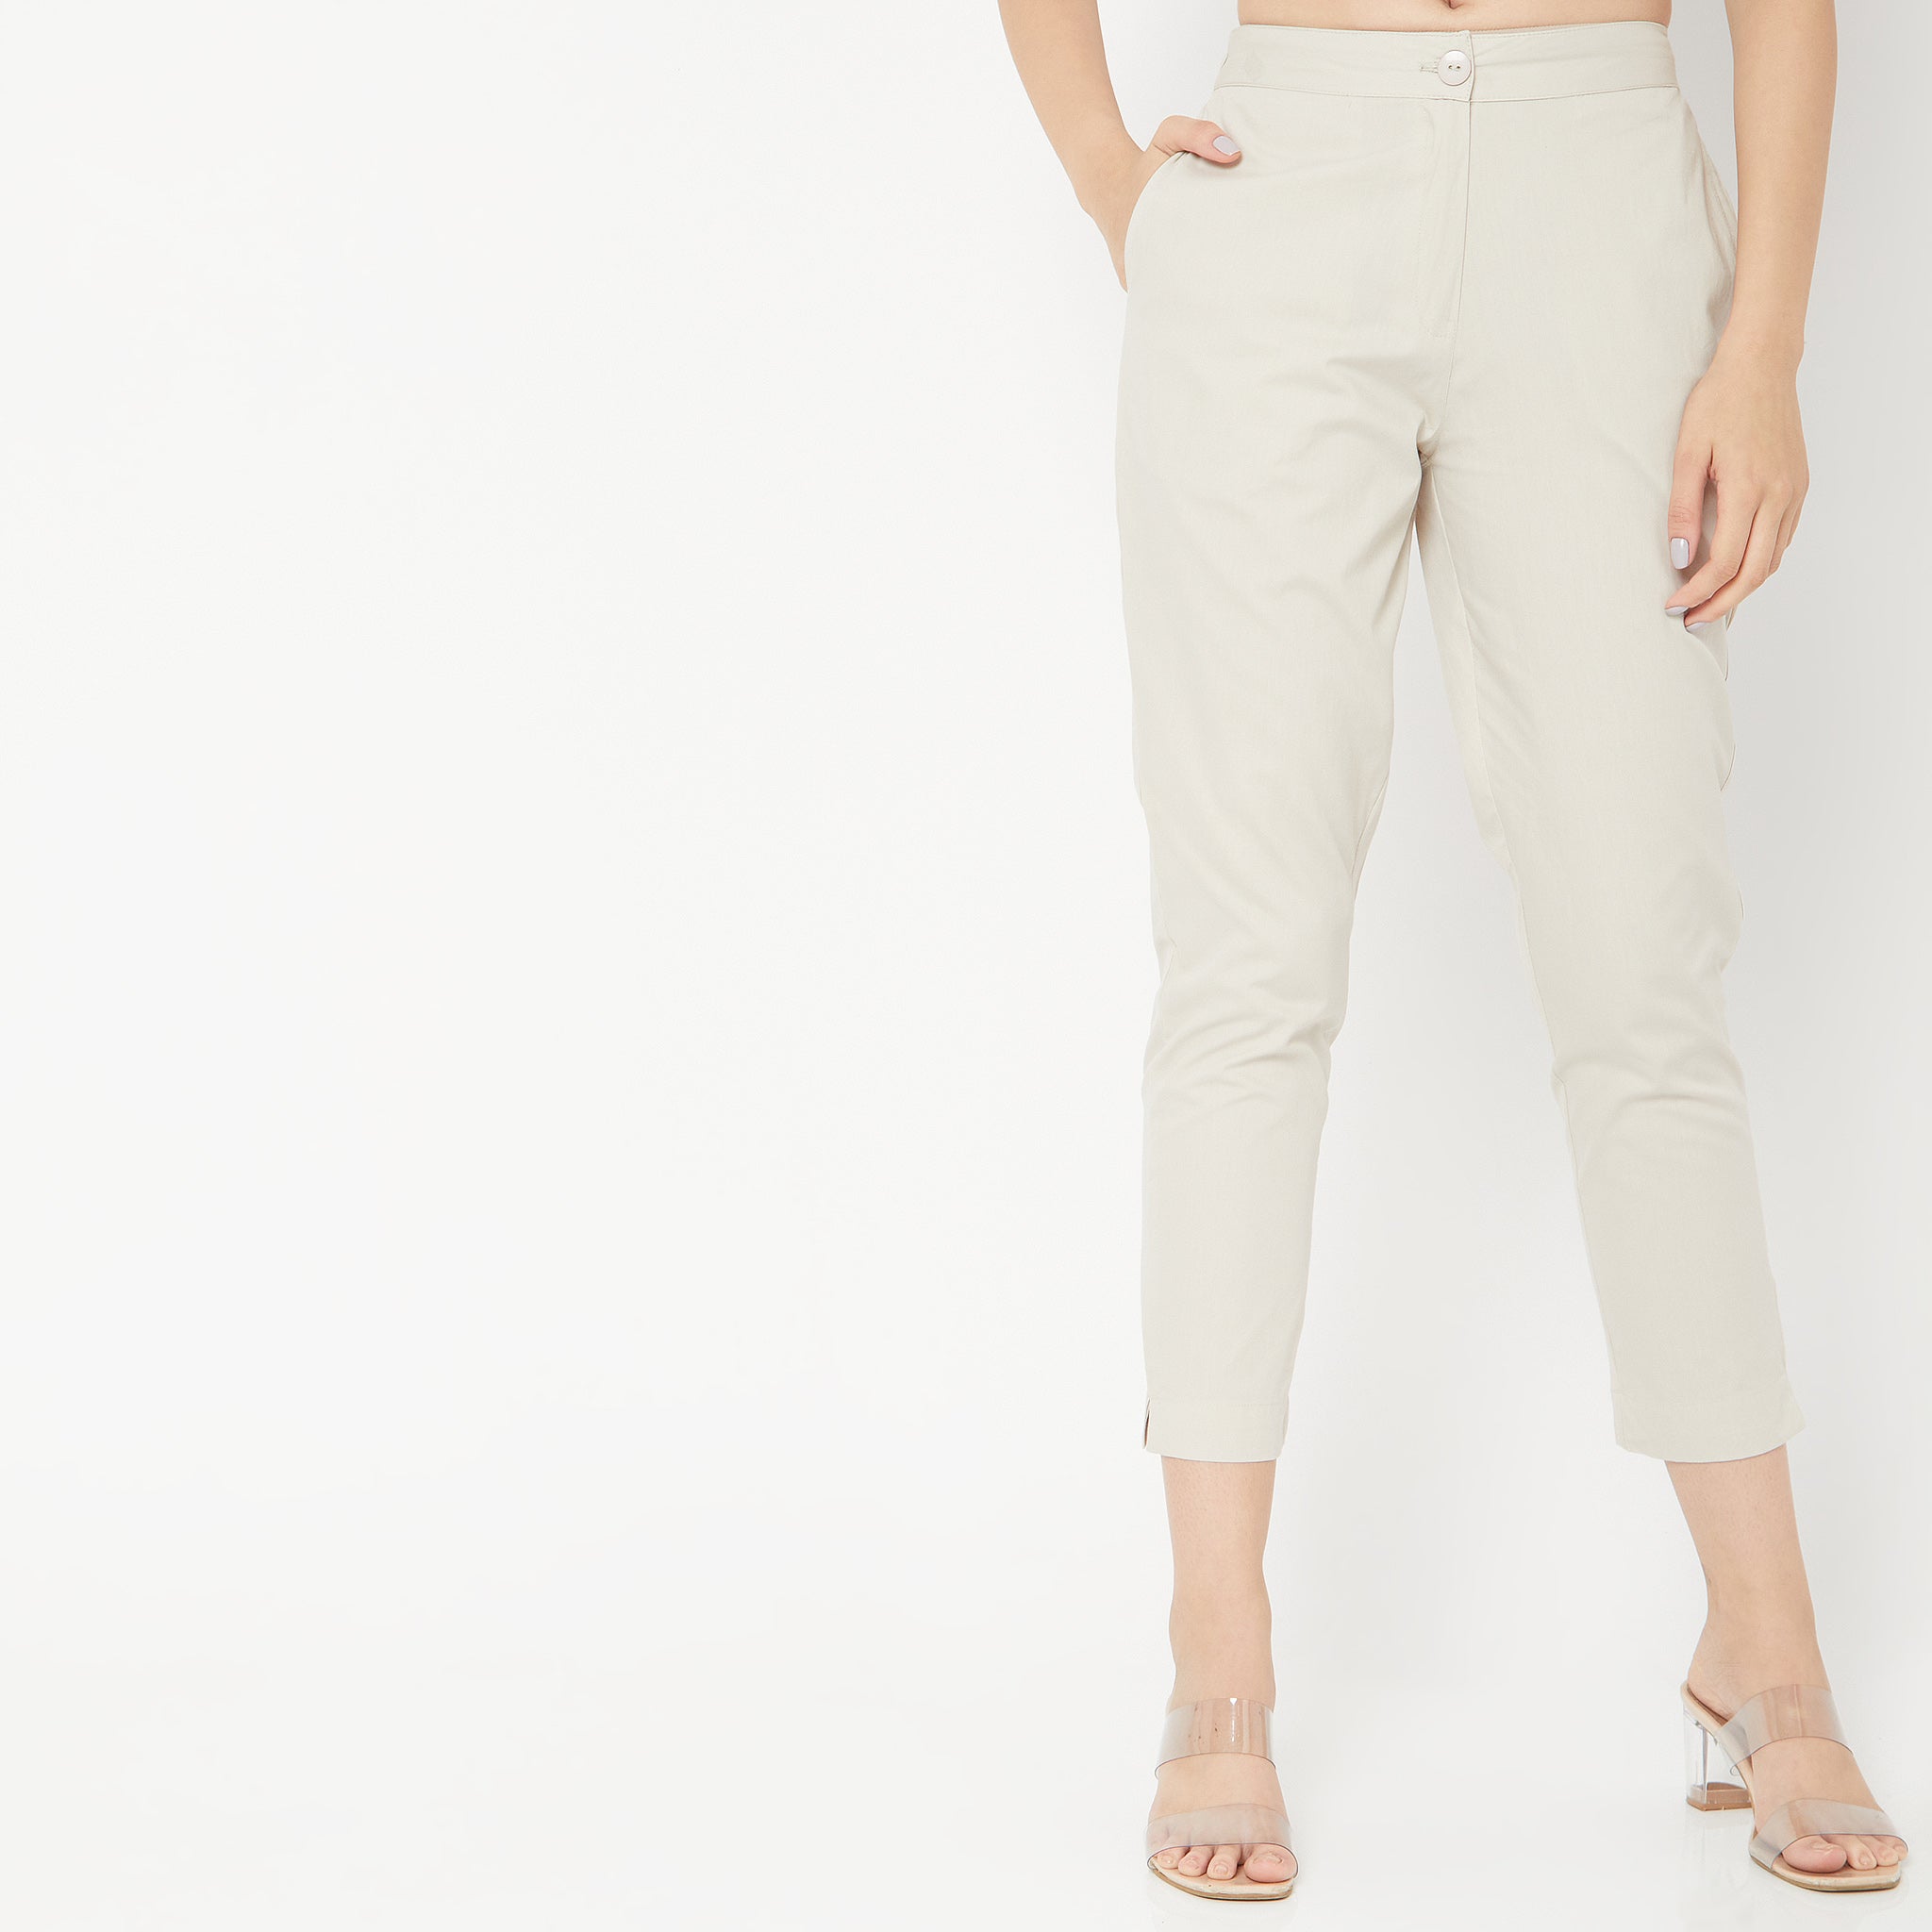 Slim Fit Solid Mid Rise Pants